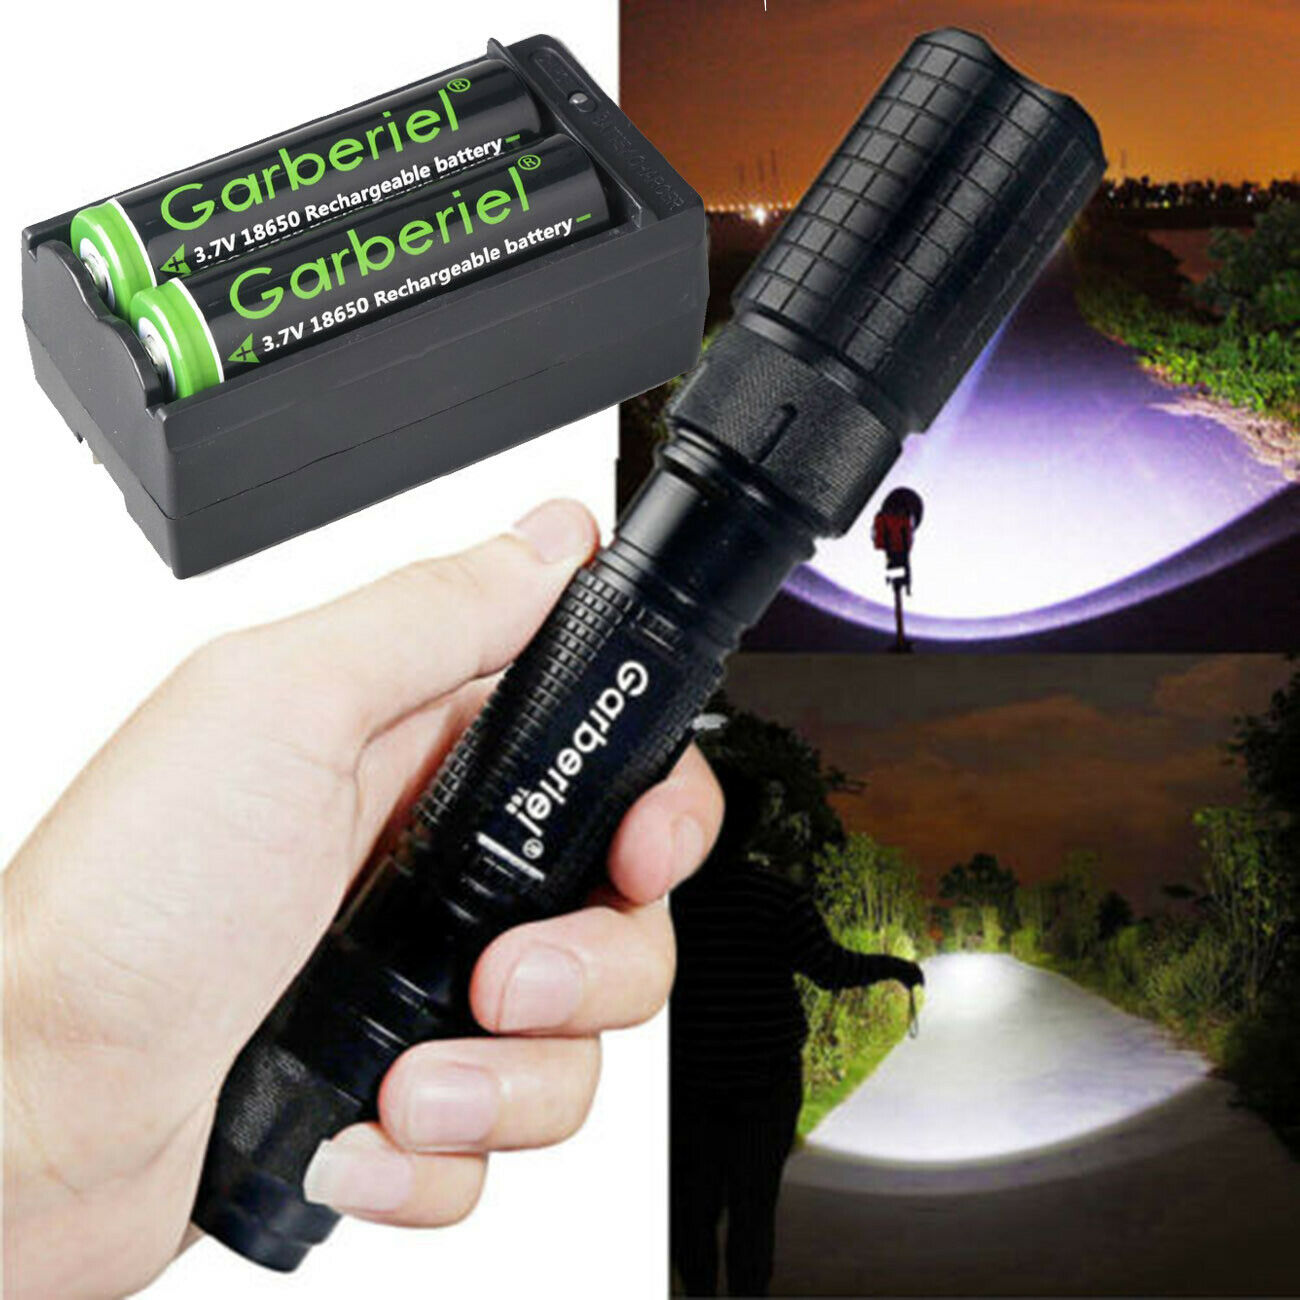 Tactical Police 900000Lumen T6 5Modes LED Flashlight Aluminum Zoomable Torch